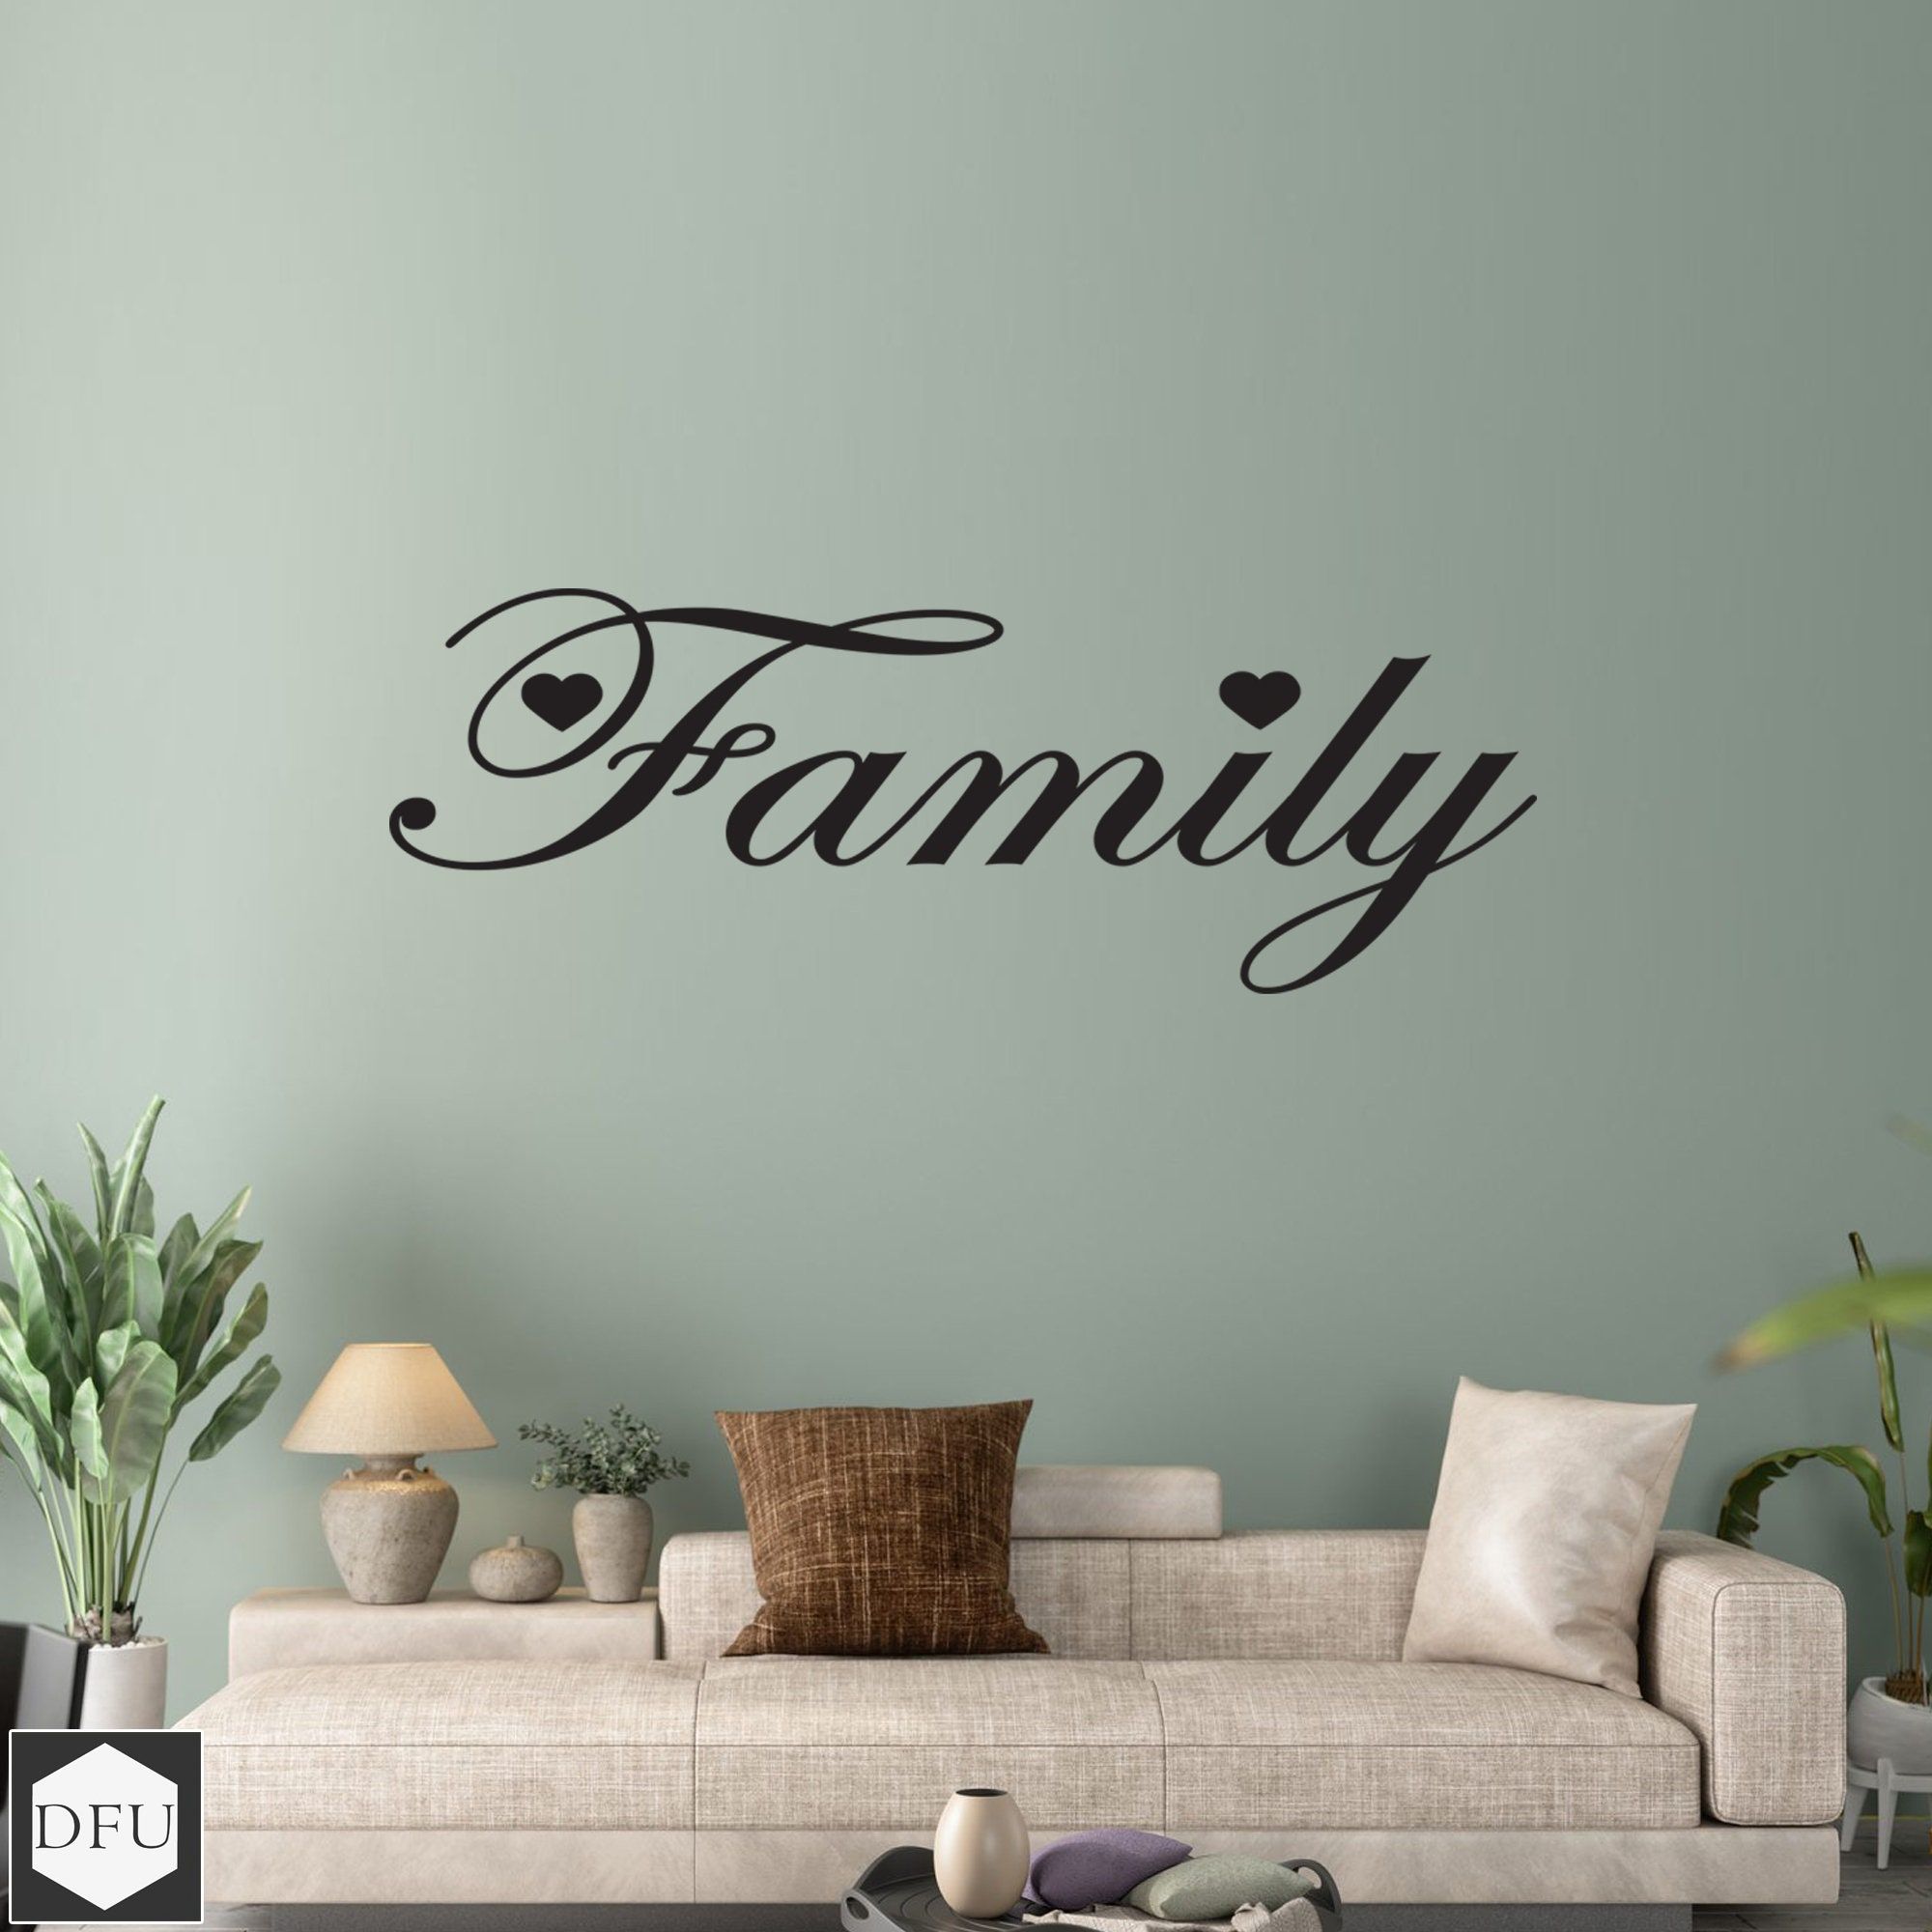 Family Word Wall Sticker Wall Art Decal Living Room – Etsy Pertaining To Recent Family Word Wall Art (Gallery 9 of 20)